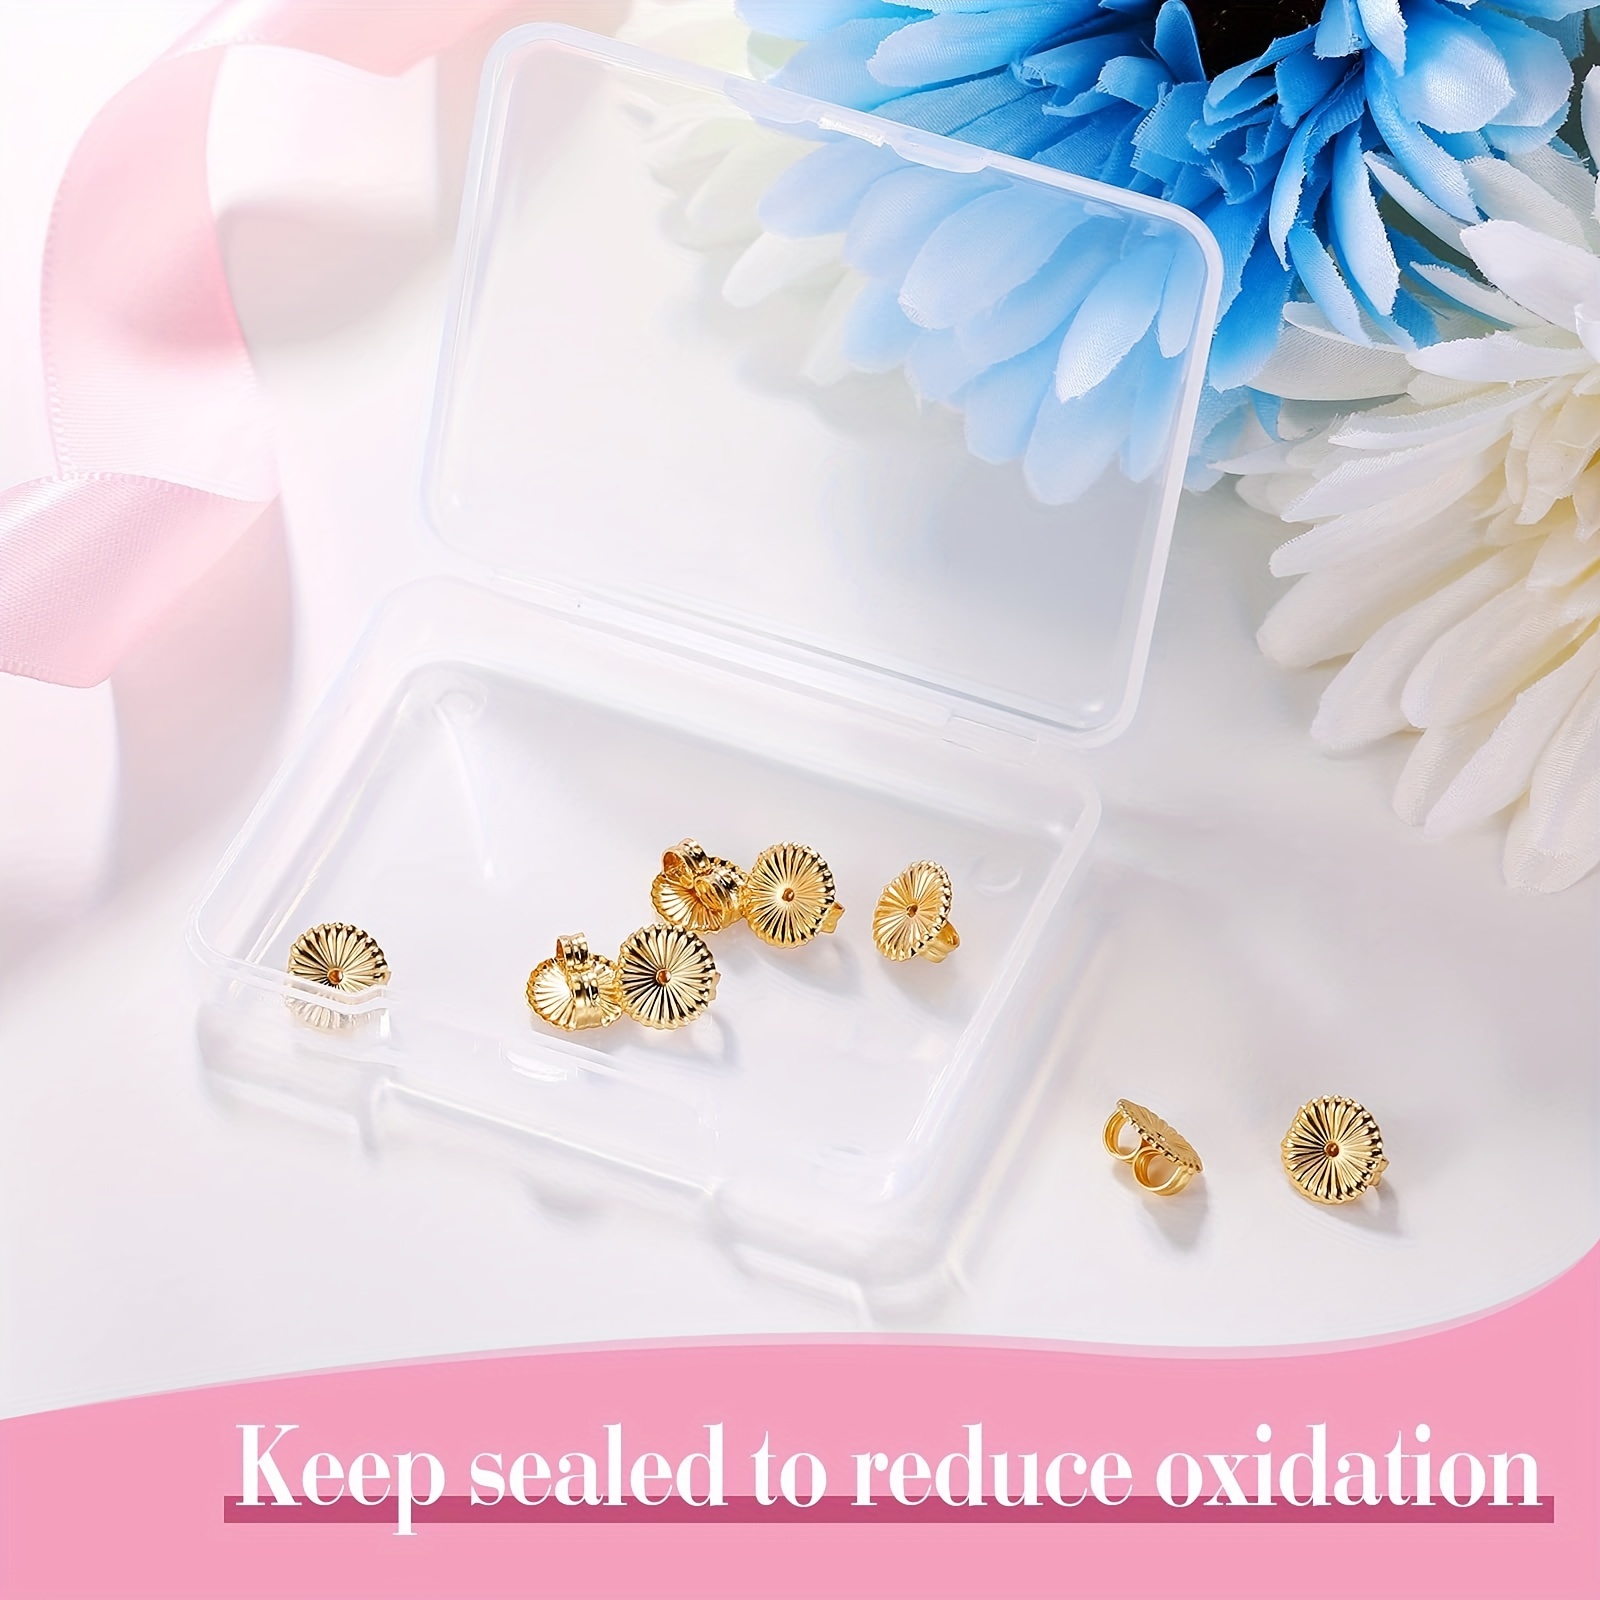 4 PCS 9mm Extra Large Earring Back Gold Fill Heavy Earring Support, Large  Backing for Heavy Earrings 